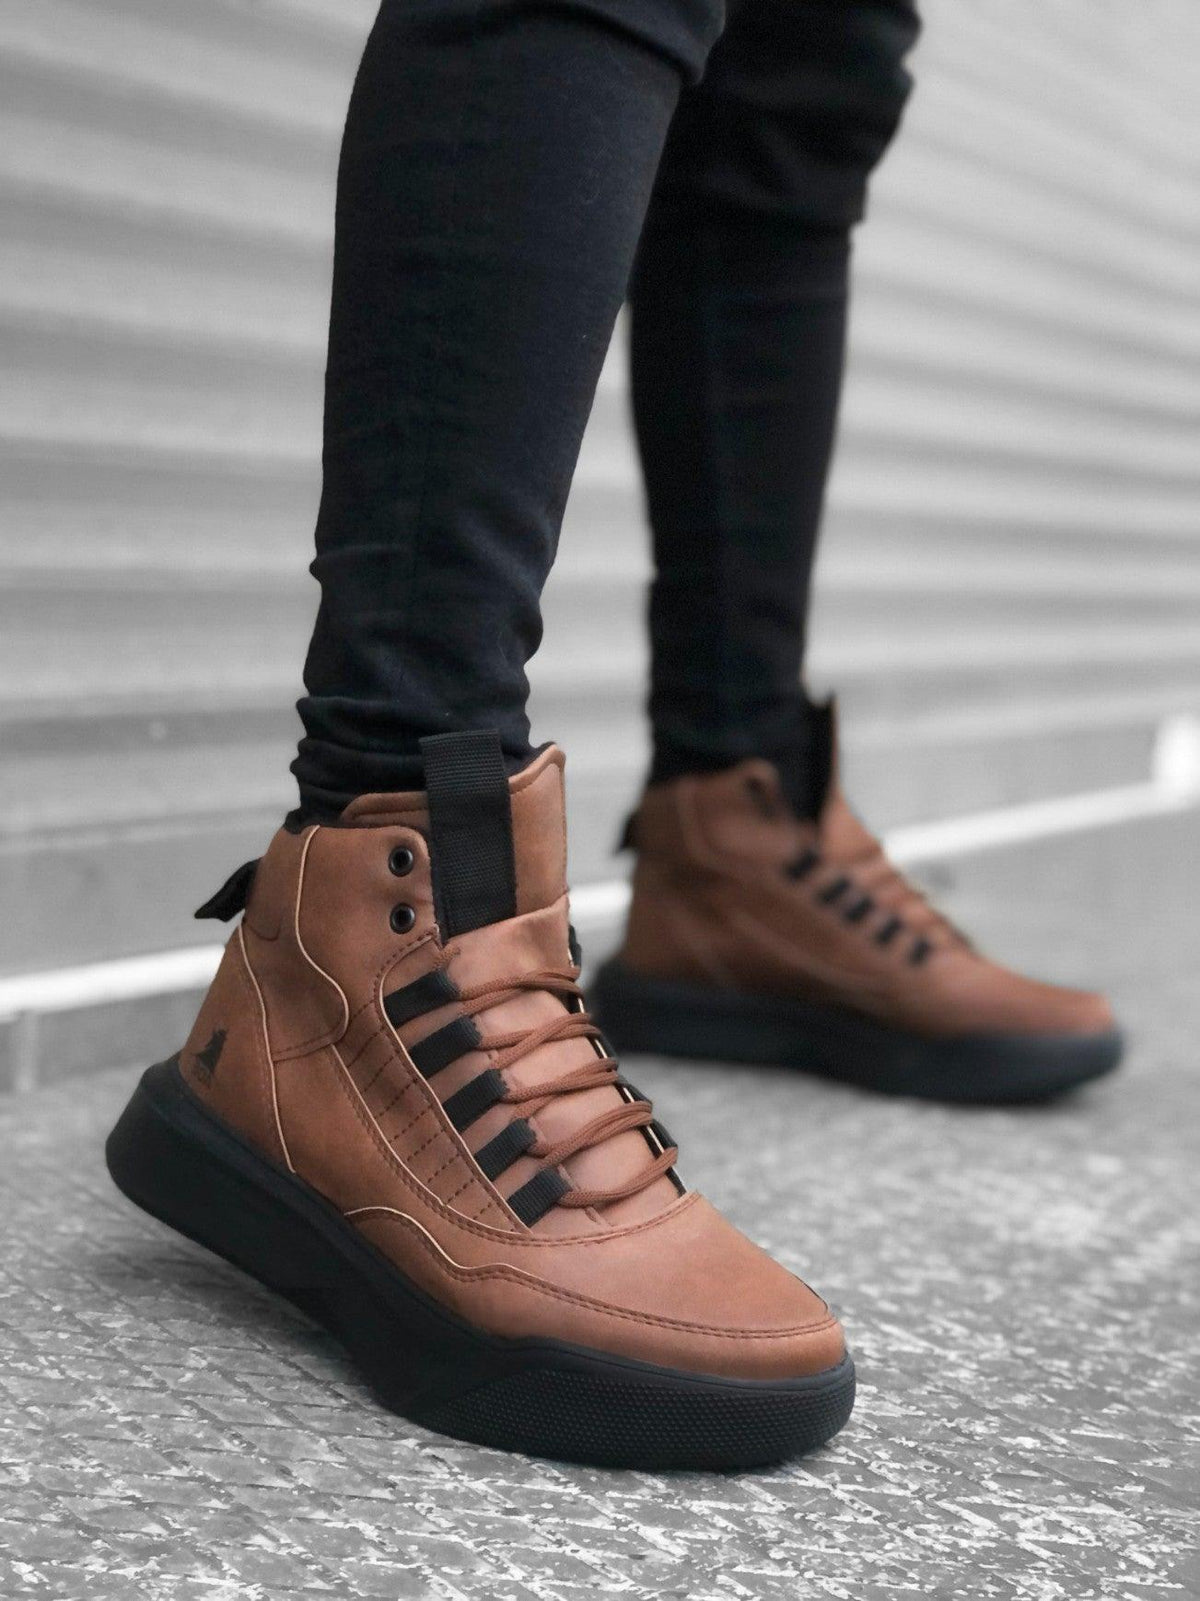 BA0192 Lace-up Men's High-Sole Tan Sports Boots - STREET MODE ™